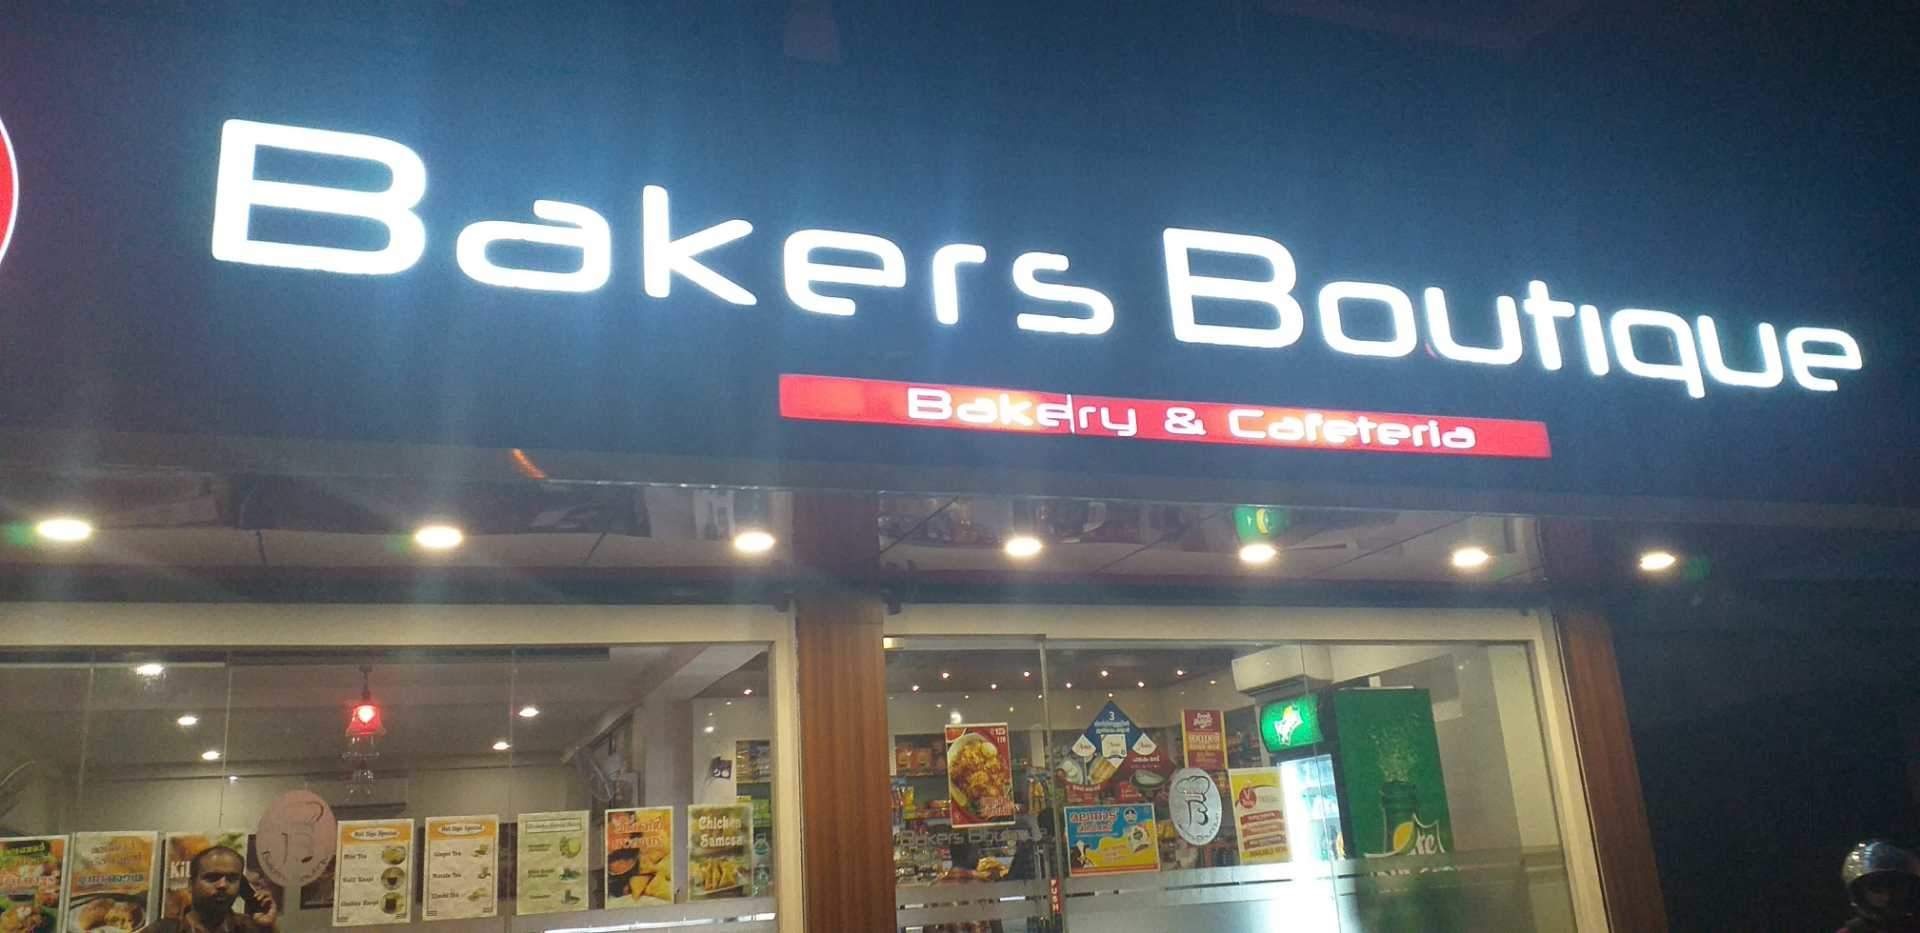 Bakers Boutique, Backery & Cafeteria,  service in Thiruvalla, Pathanamthitta